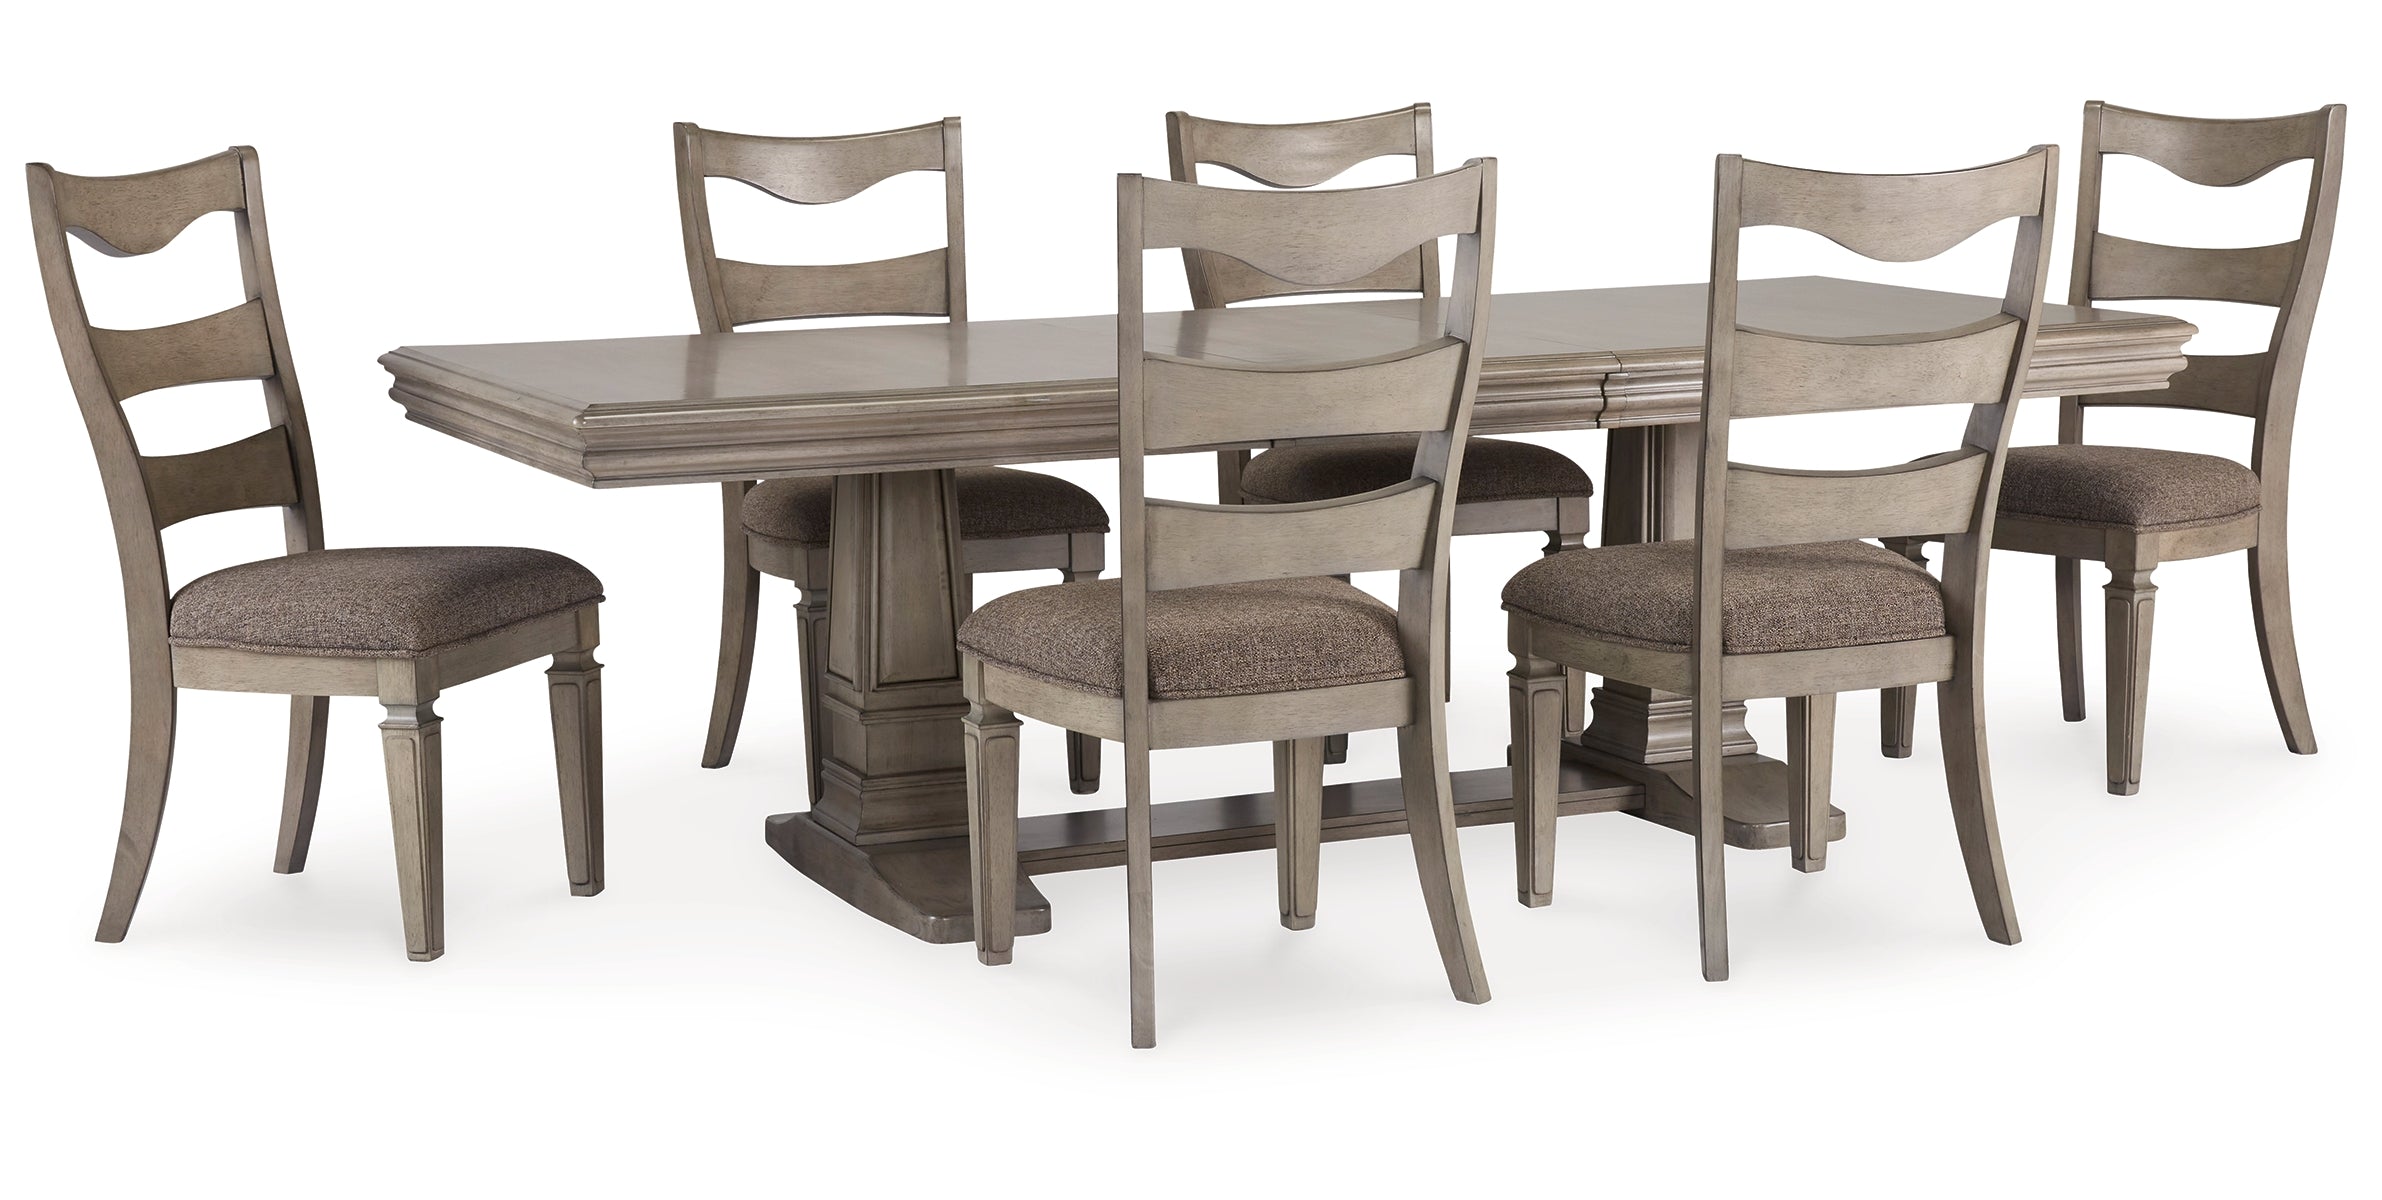 Lexorne Dining Table and 6 Chairs